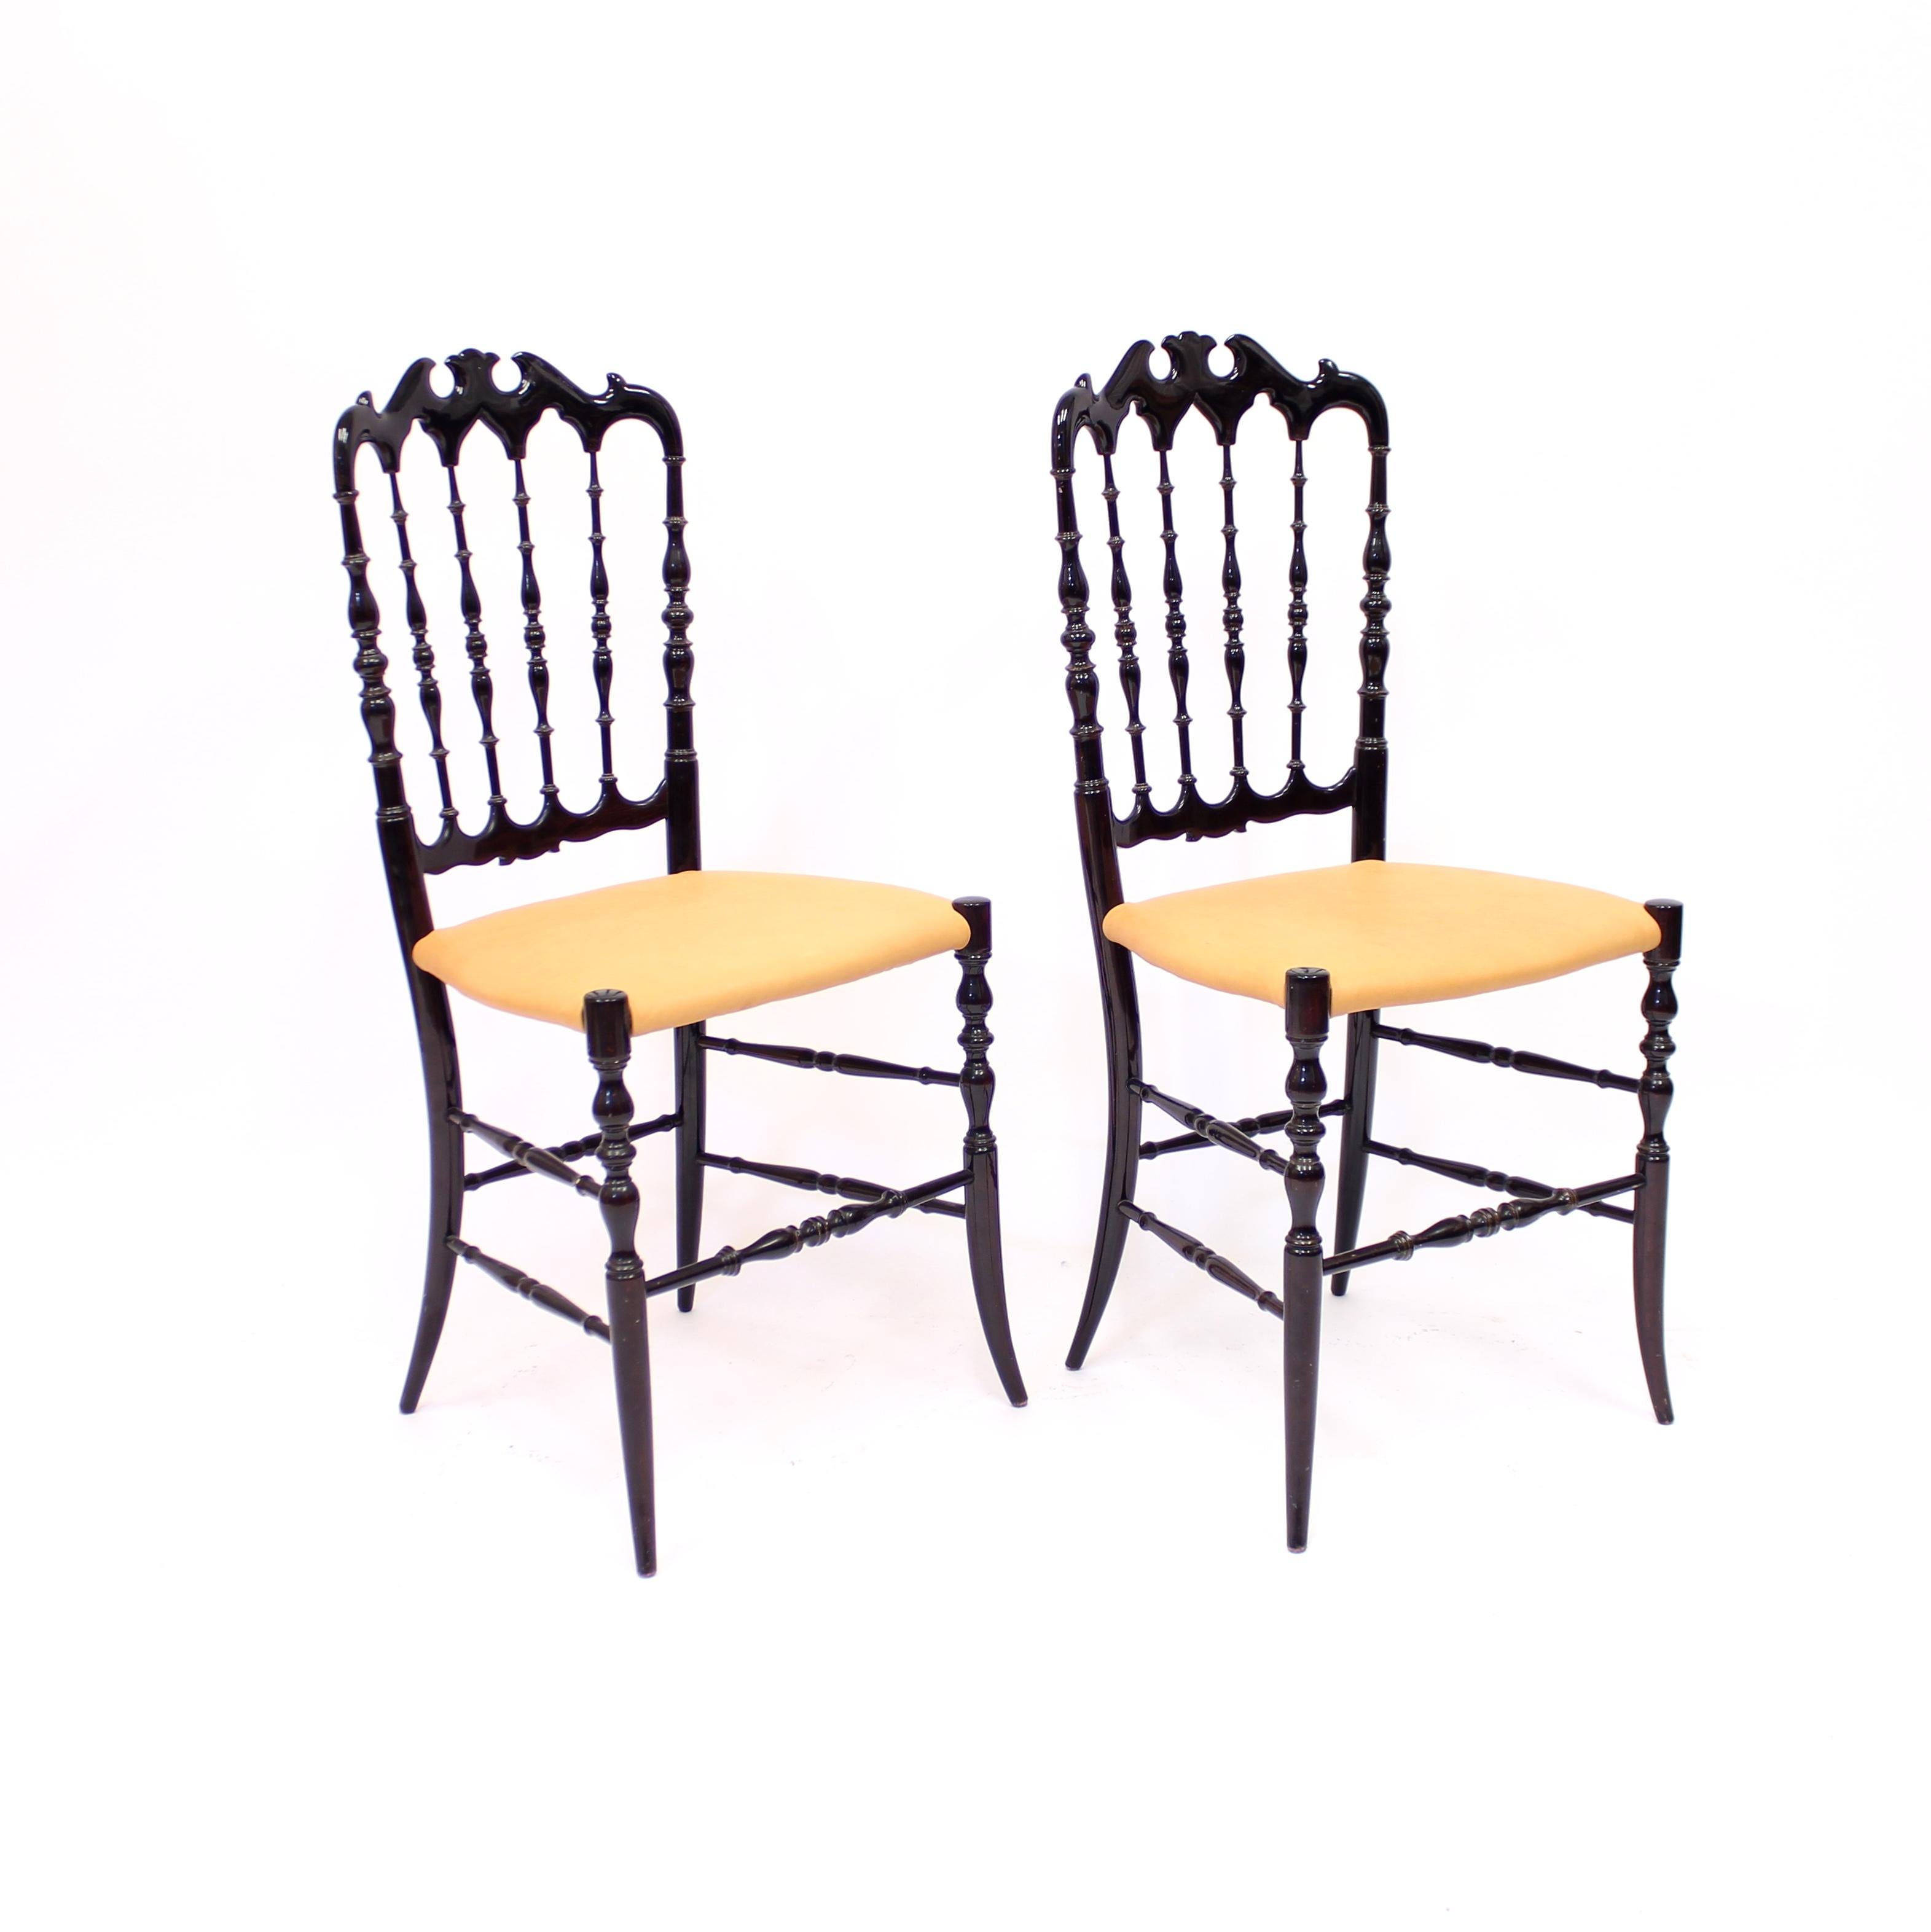 20th Century Pair of Vintage Chiavari Chairs with Leather Seats, circa 1950